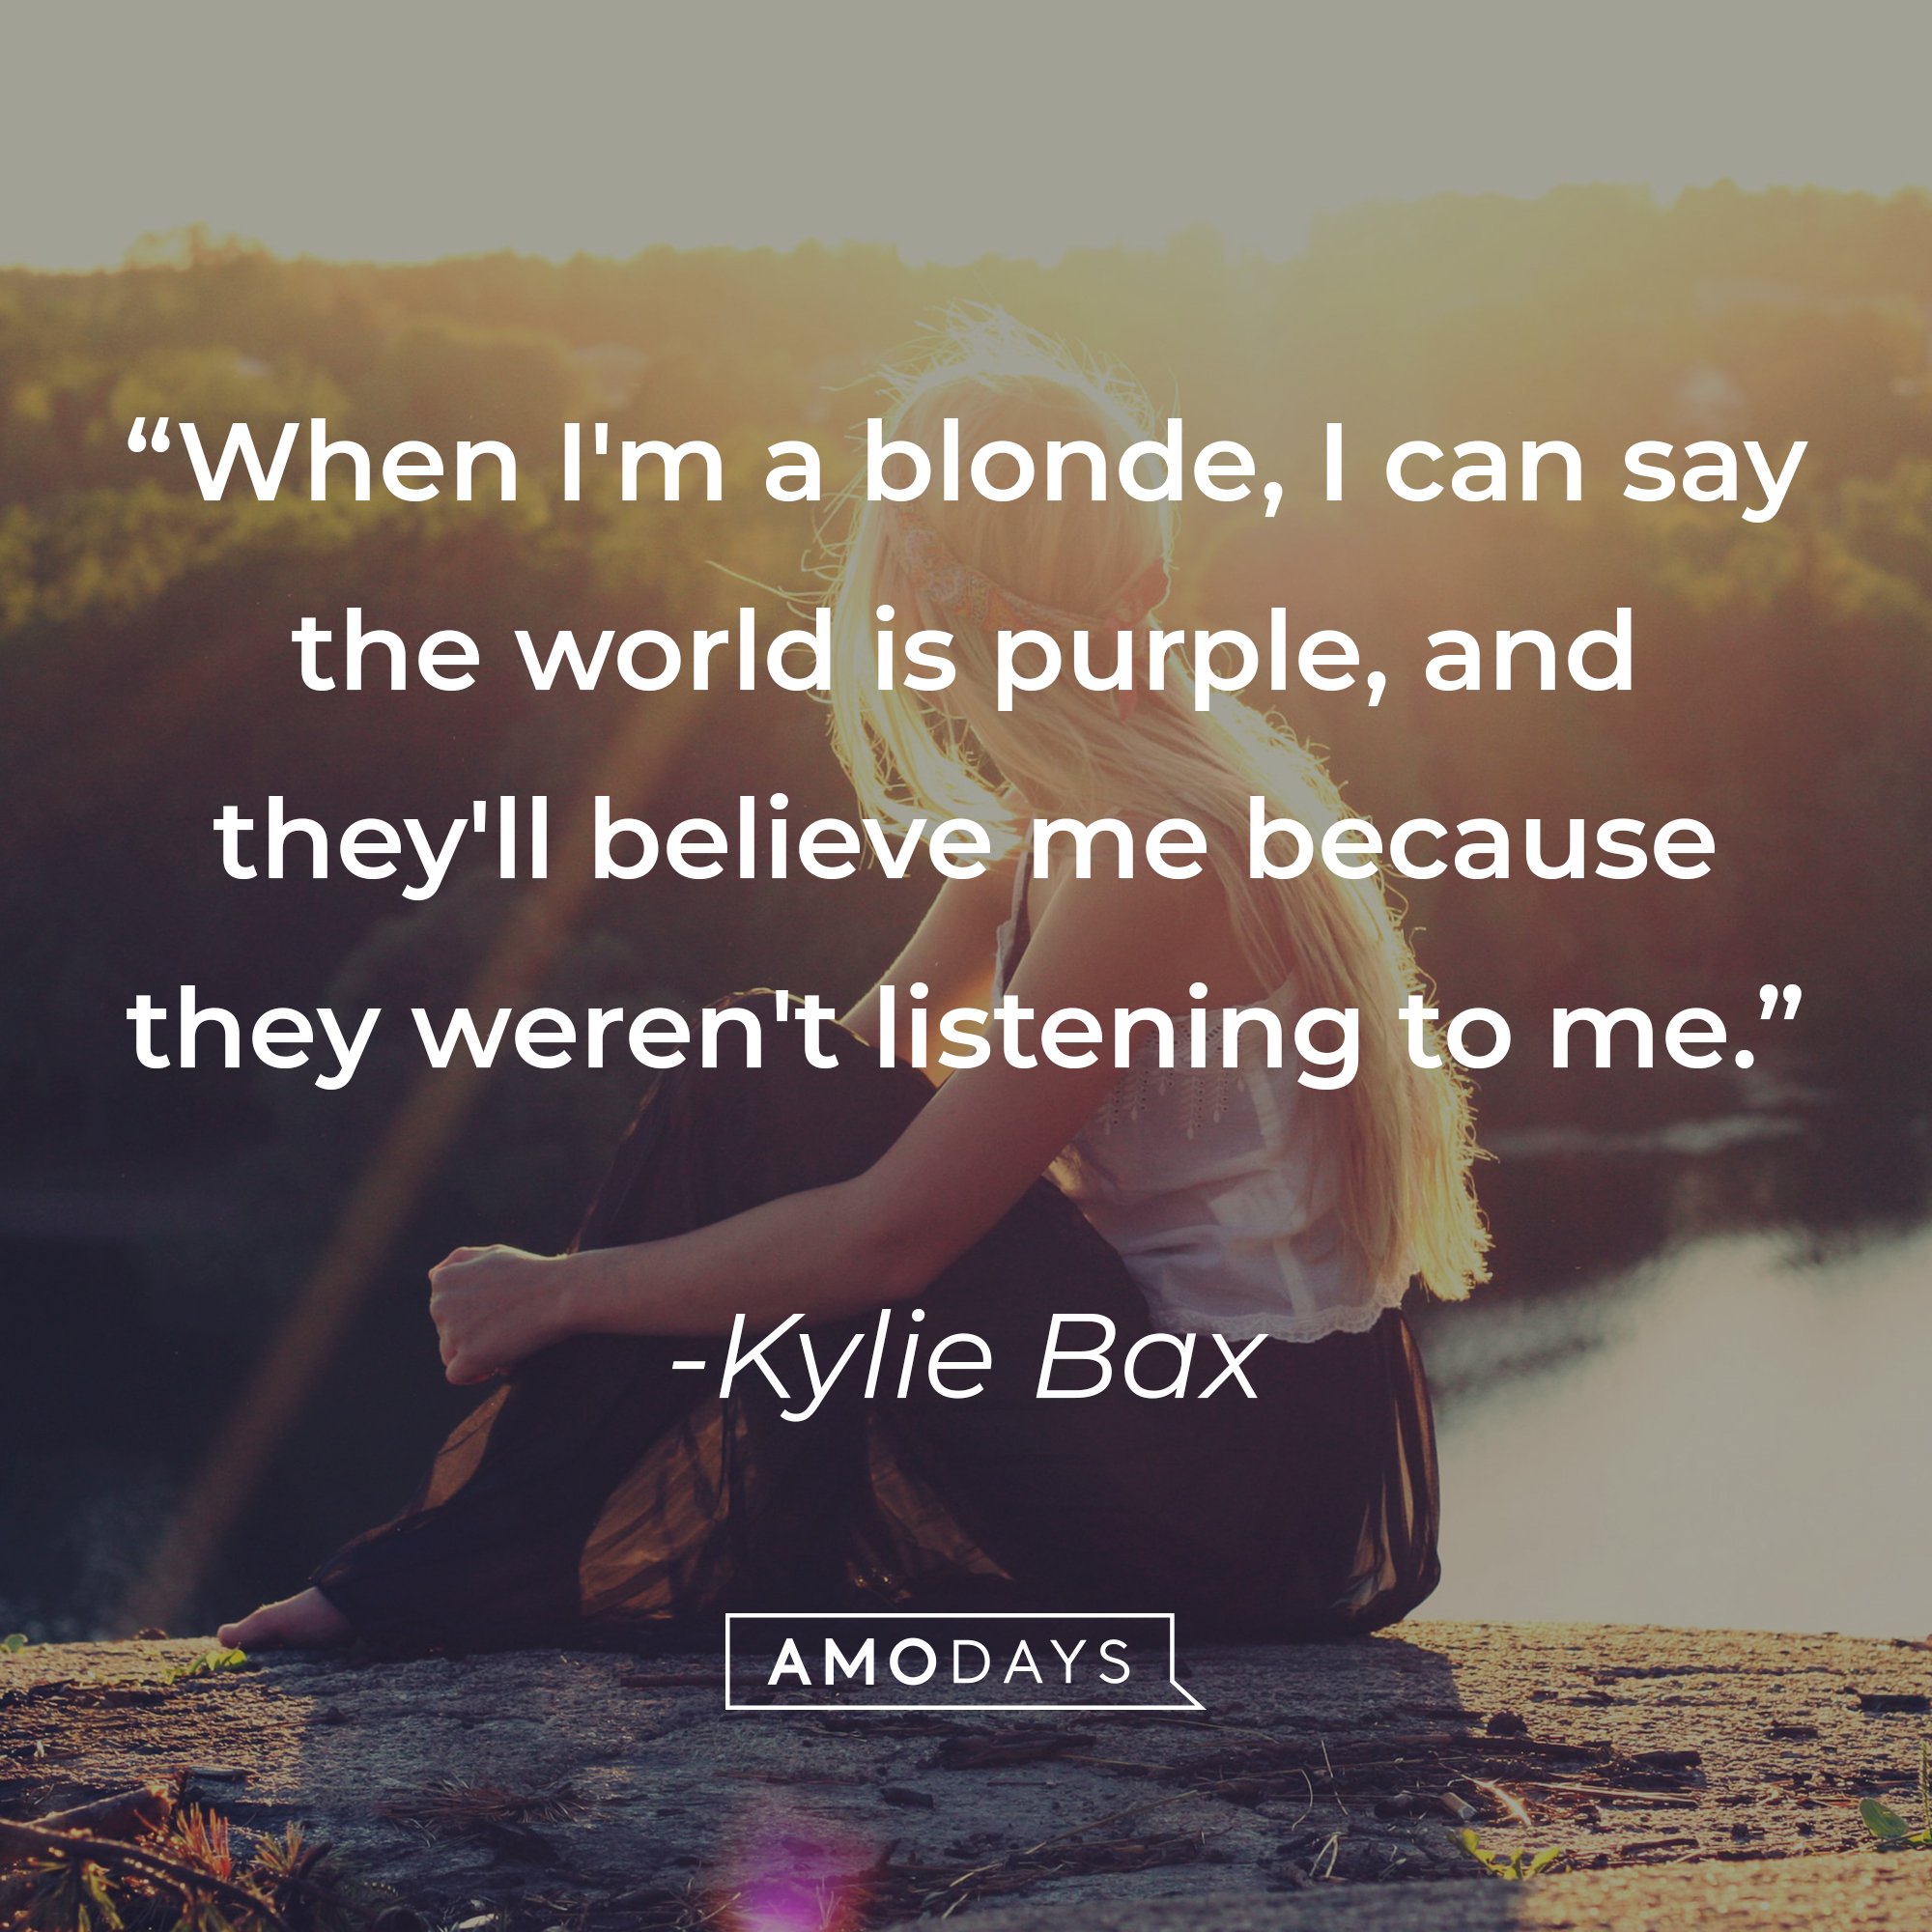  Kylie Bax’s quote: "When I'm a blonde, I can say the world is purple, and they'll believe me because they weren't listening to me." | Image: AmoDays